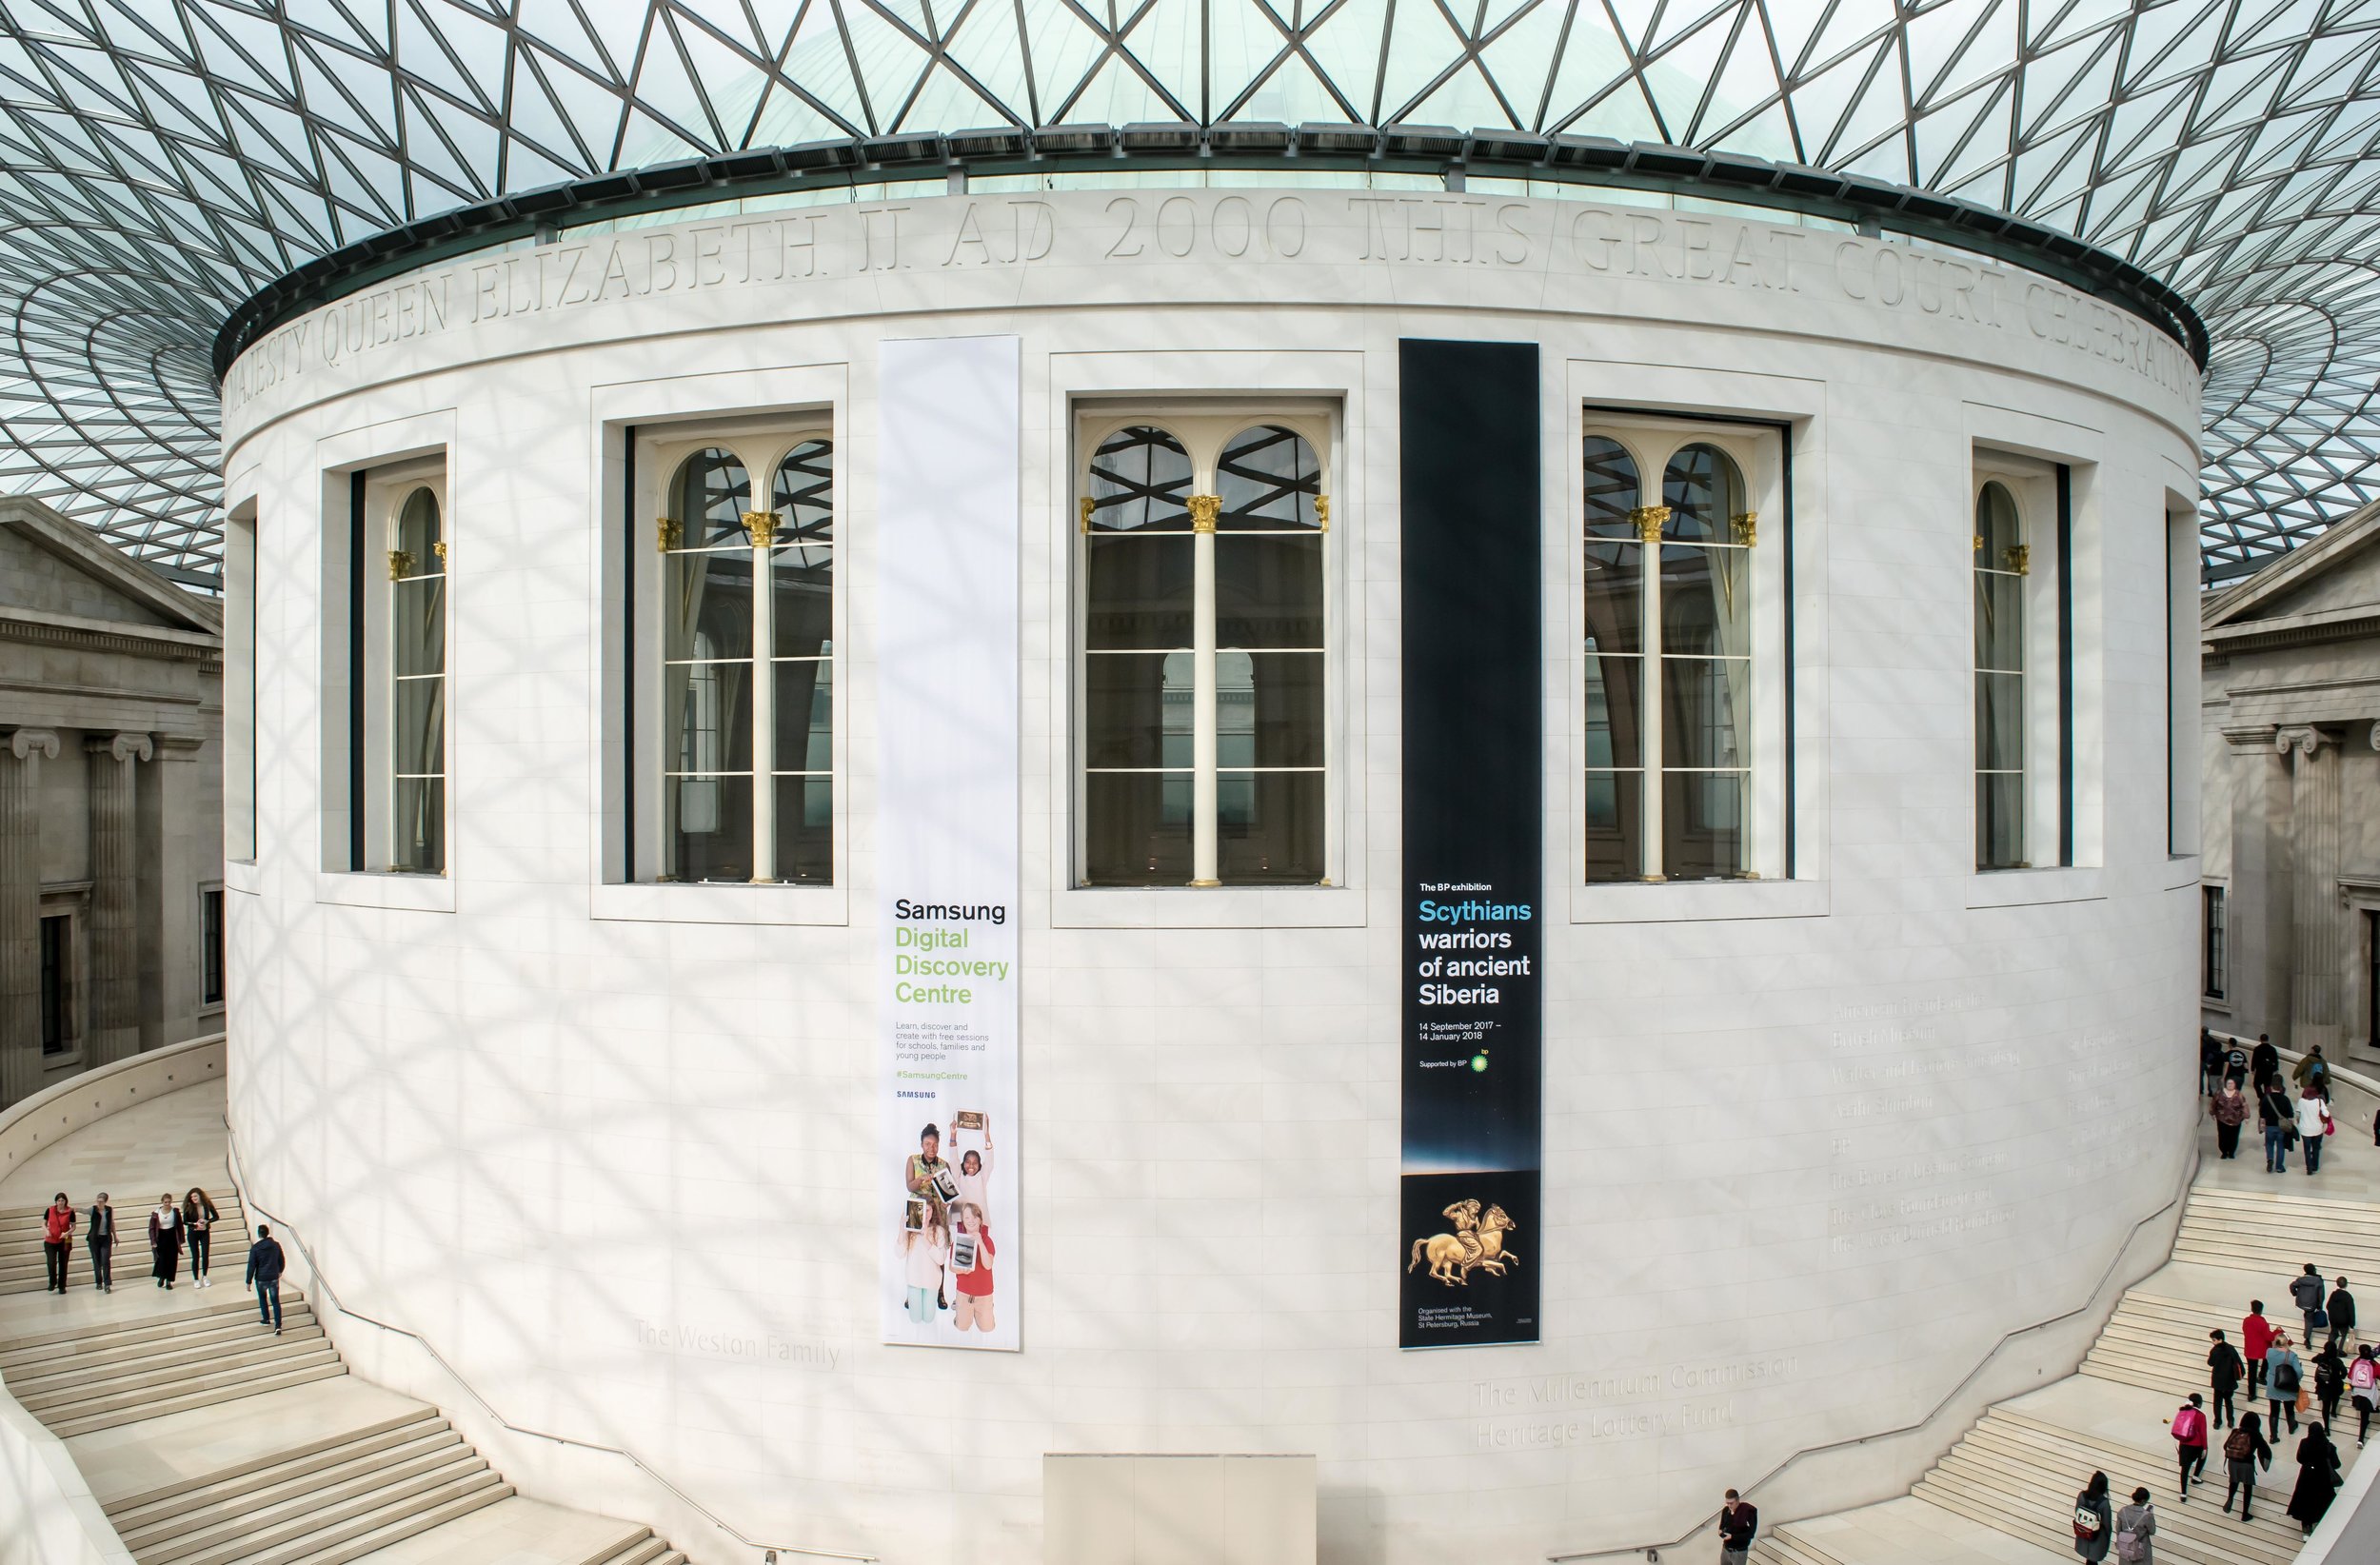 A Short Guide to the British Museum: 10 Things to See